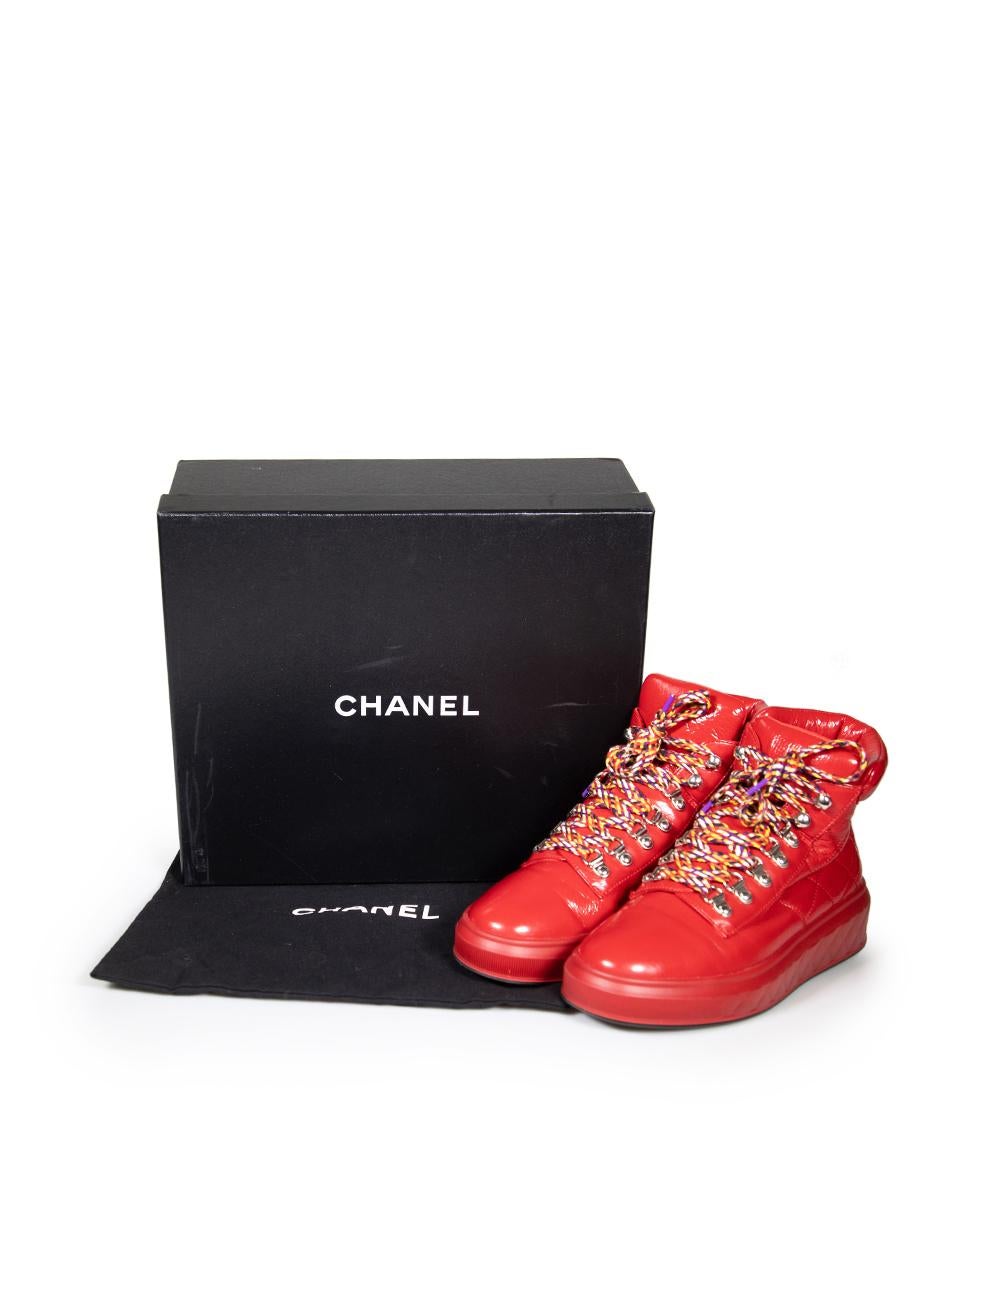 Chanel Red Patent Leather Padded Trainers Size IT 38.5 2